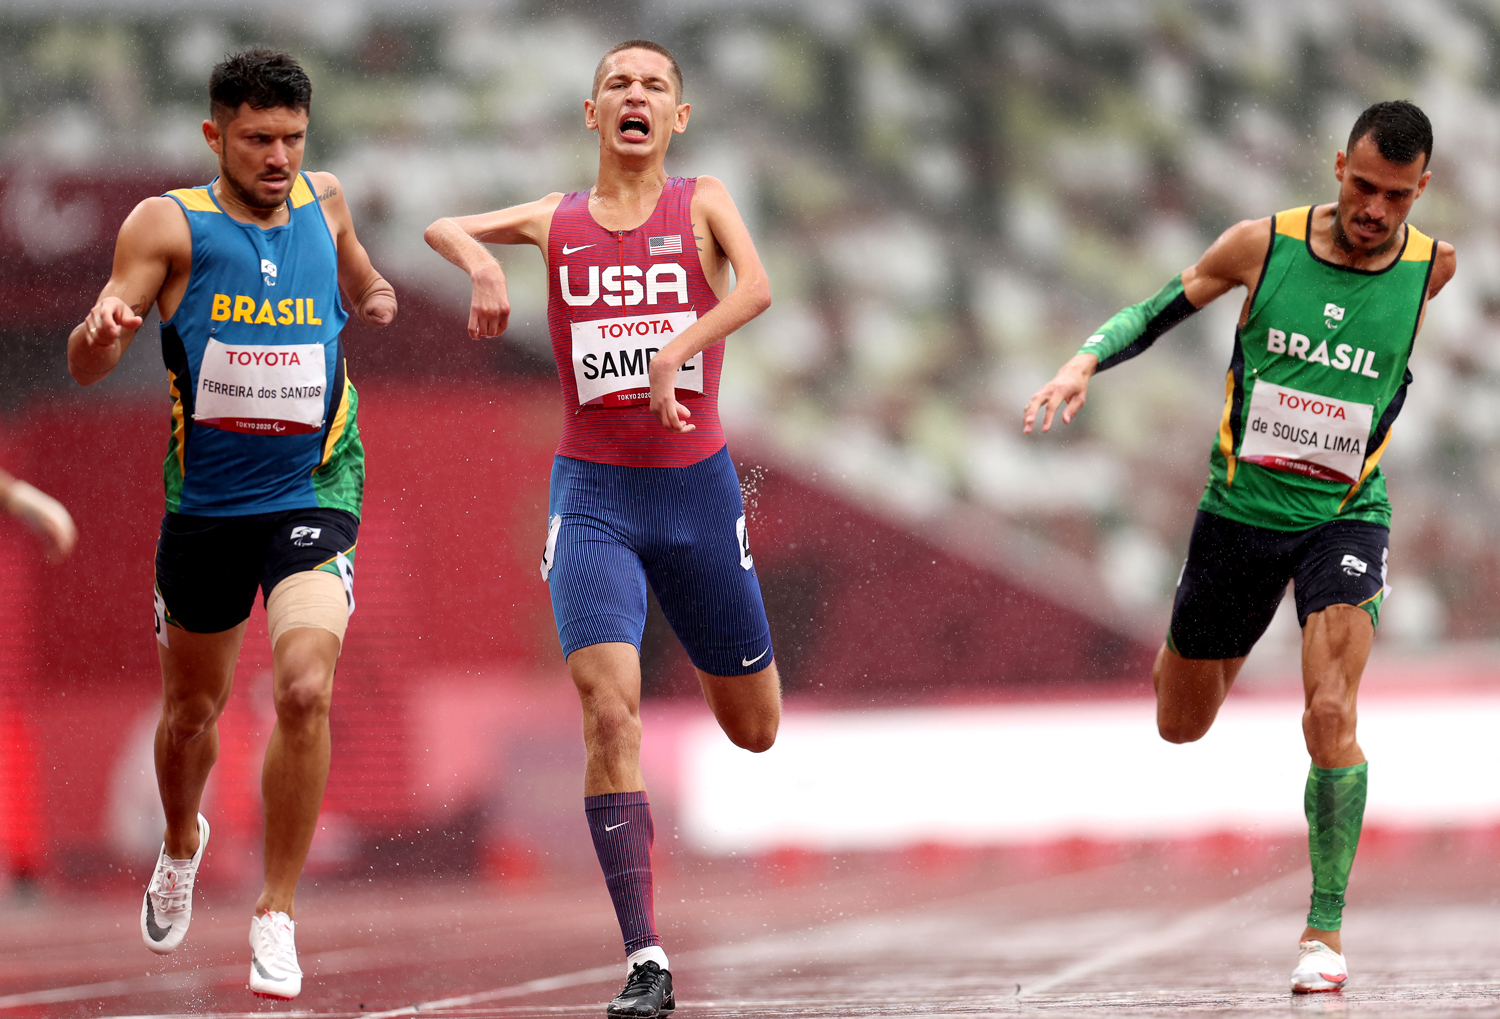 Rayven Sample ’24 (center), a sprinter on the Bucknell track and field team, flanked by runners from Brazil, competed in the final of the men’s 400 meters (T45 classification) at the Paralympic Games in Tokyo on Sept. 3